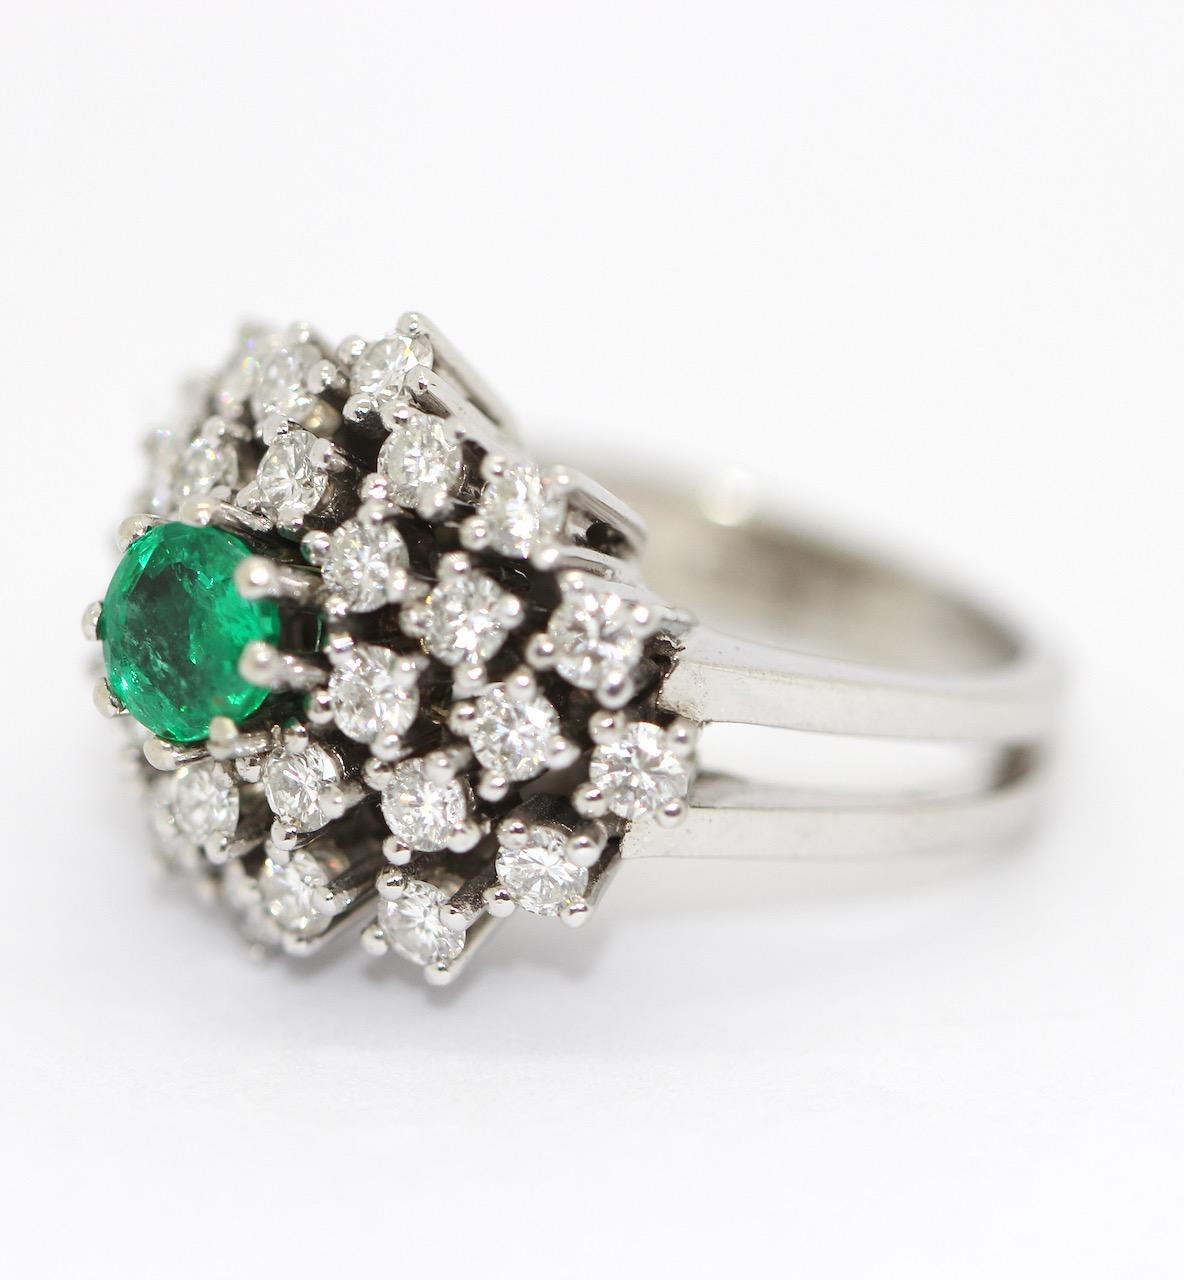 White Gold Ring Set with White Diamonds and Emerald, 14 Karat In Good Condition For Sale In Berlin, DE